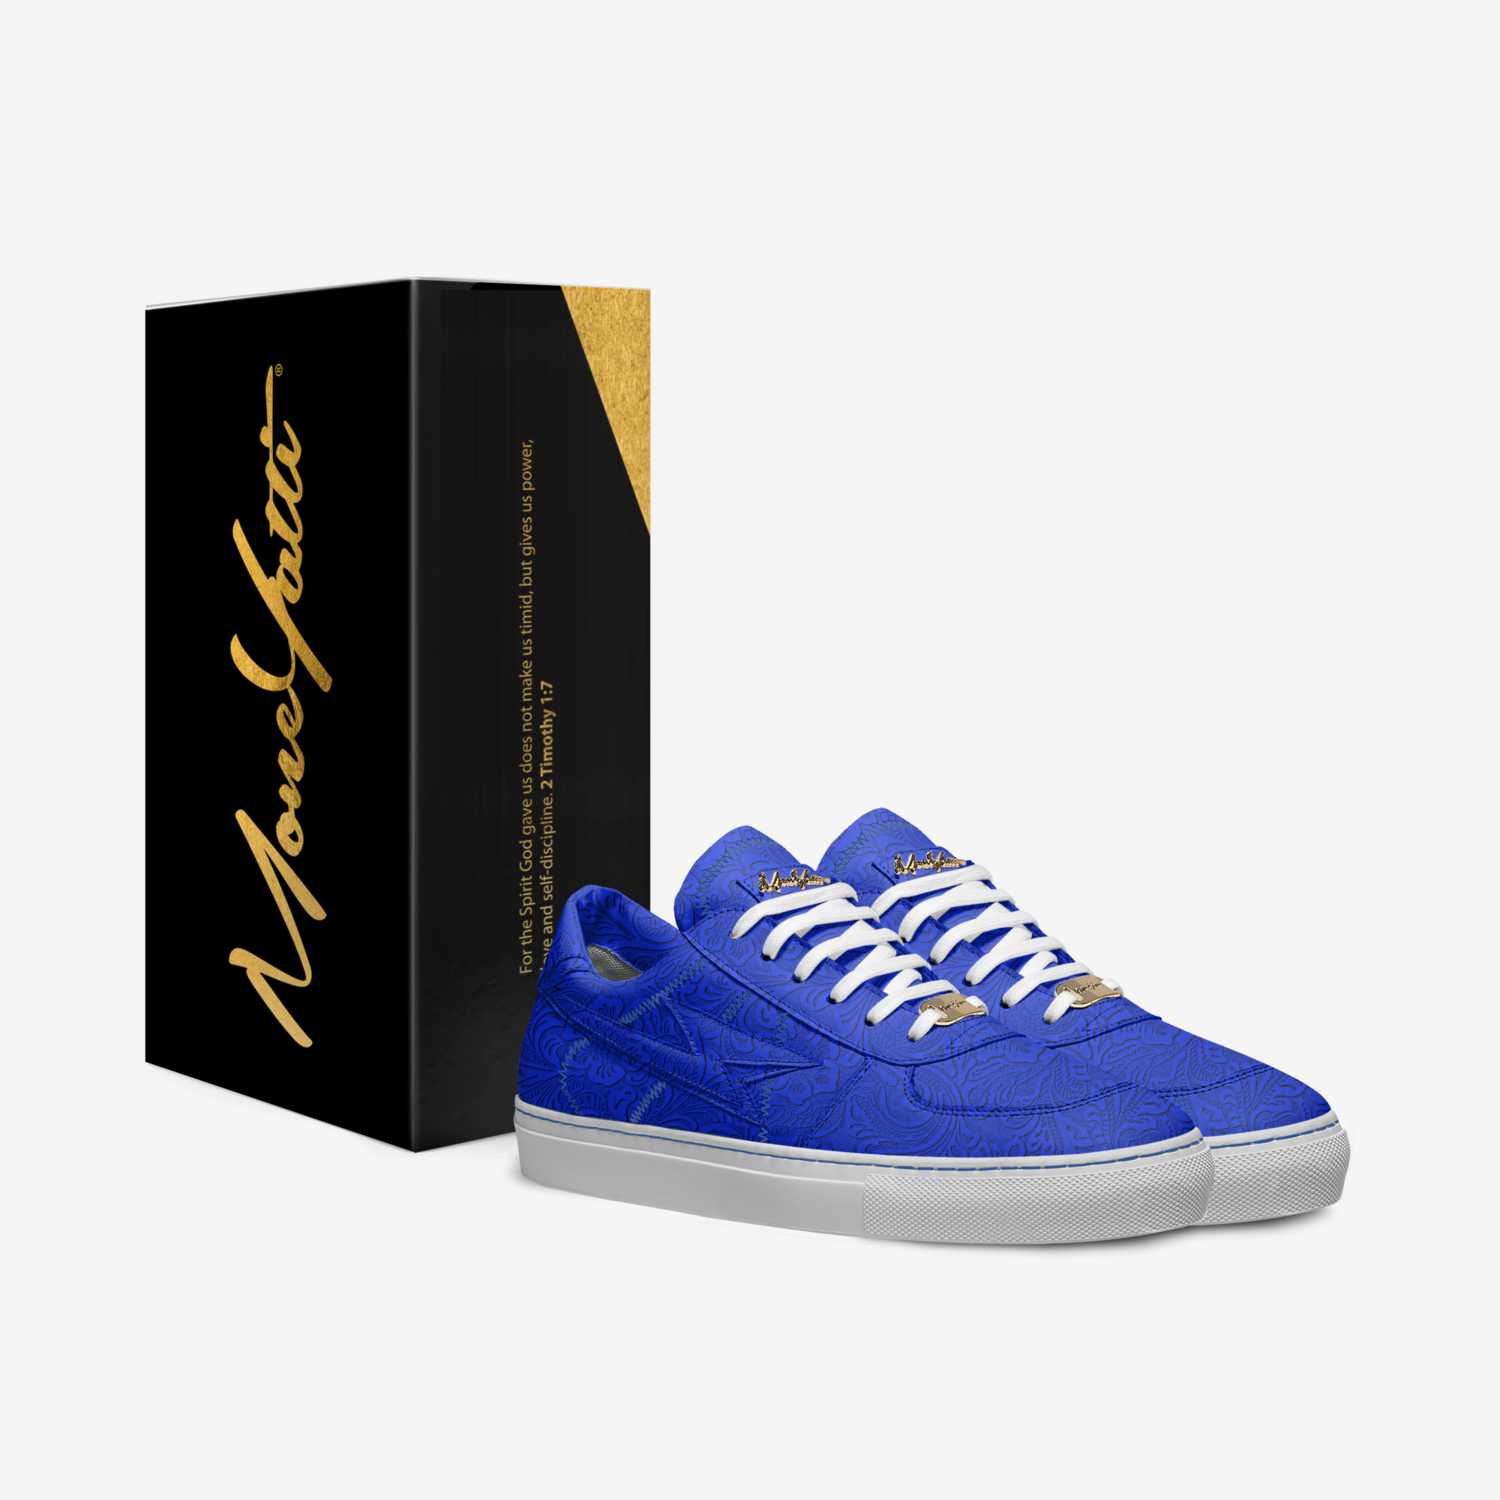 Masterpiece 084 custom made in Italy shoes by Moneyatti Brand | Box view